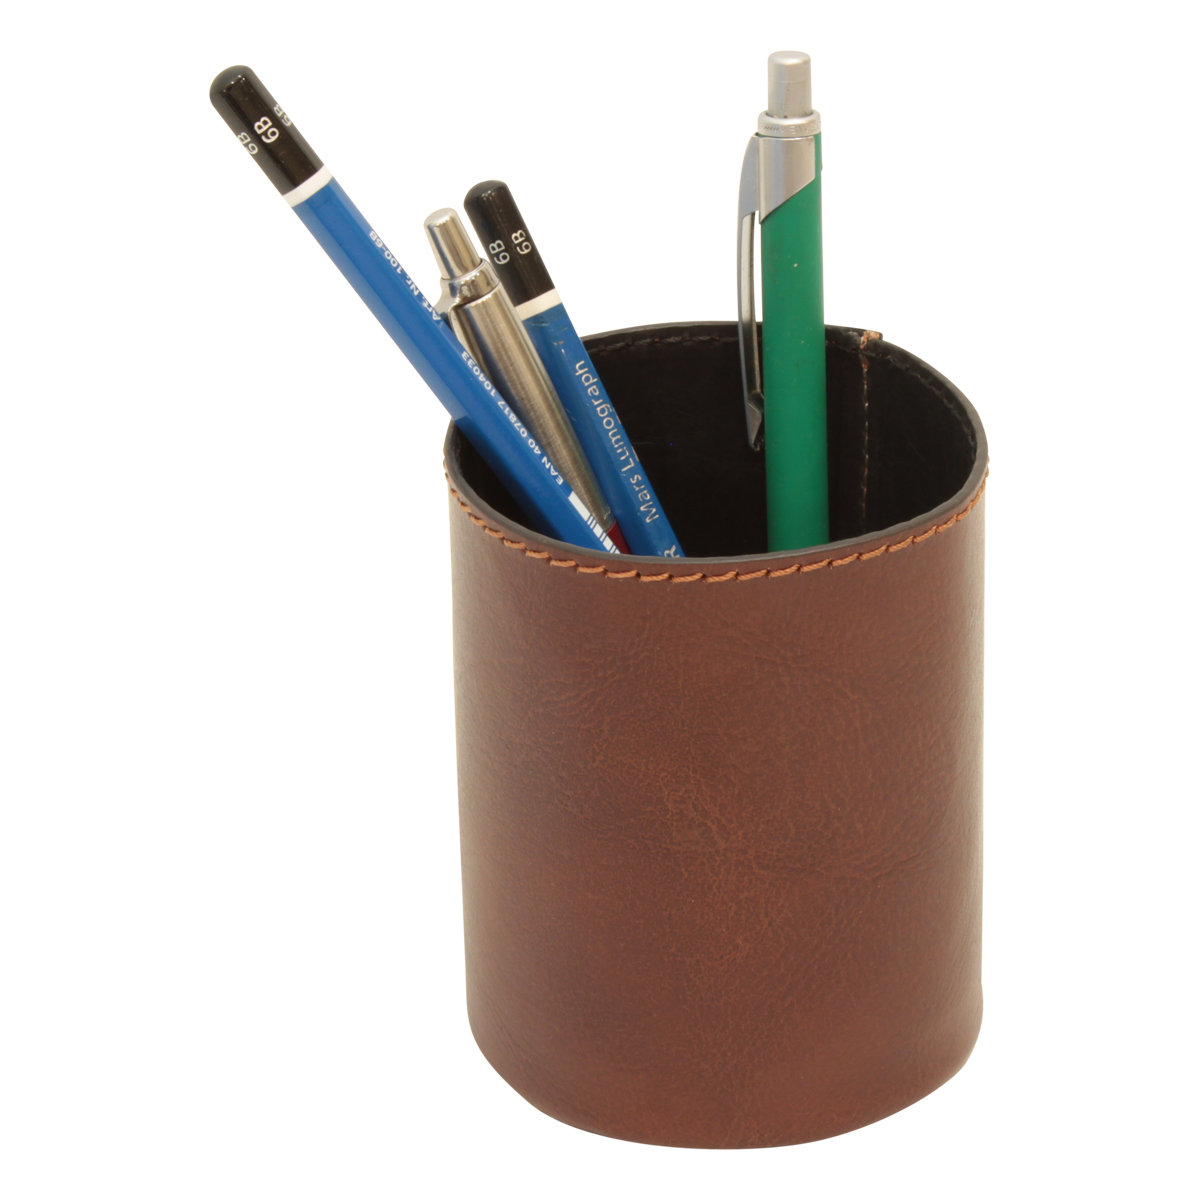 Leather pen cup | 763089MA UK | Old Angler Firenze